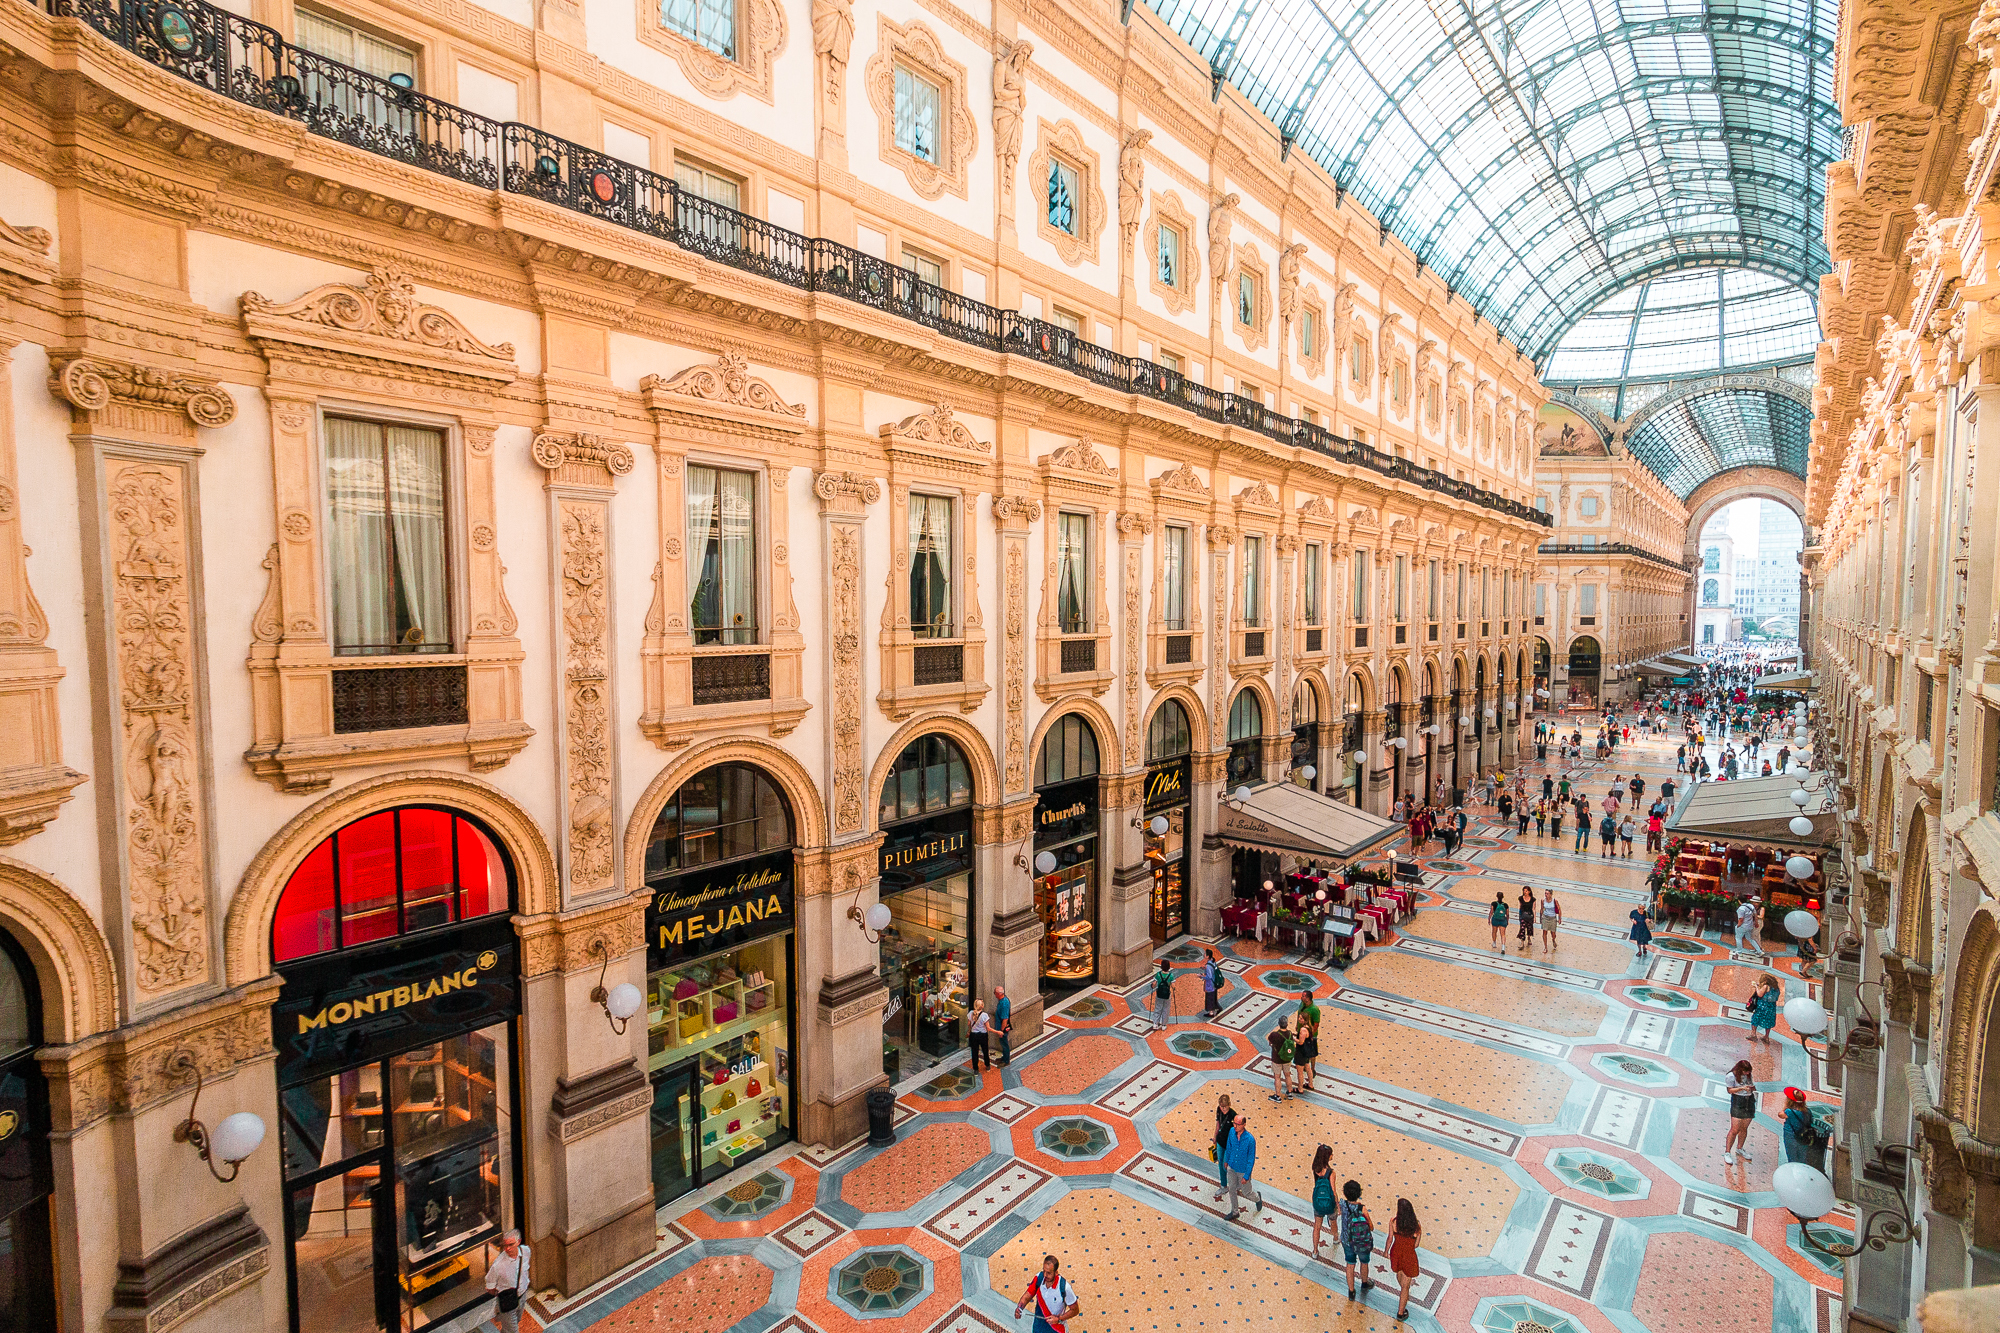 This is a panoramic view of the interior of Galleria Vittorio Emanuele II in Milan, one of the best places to visit in Italy. 